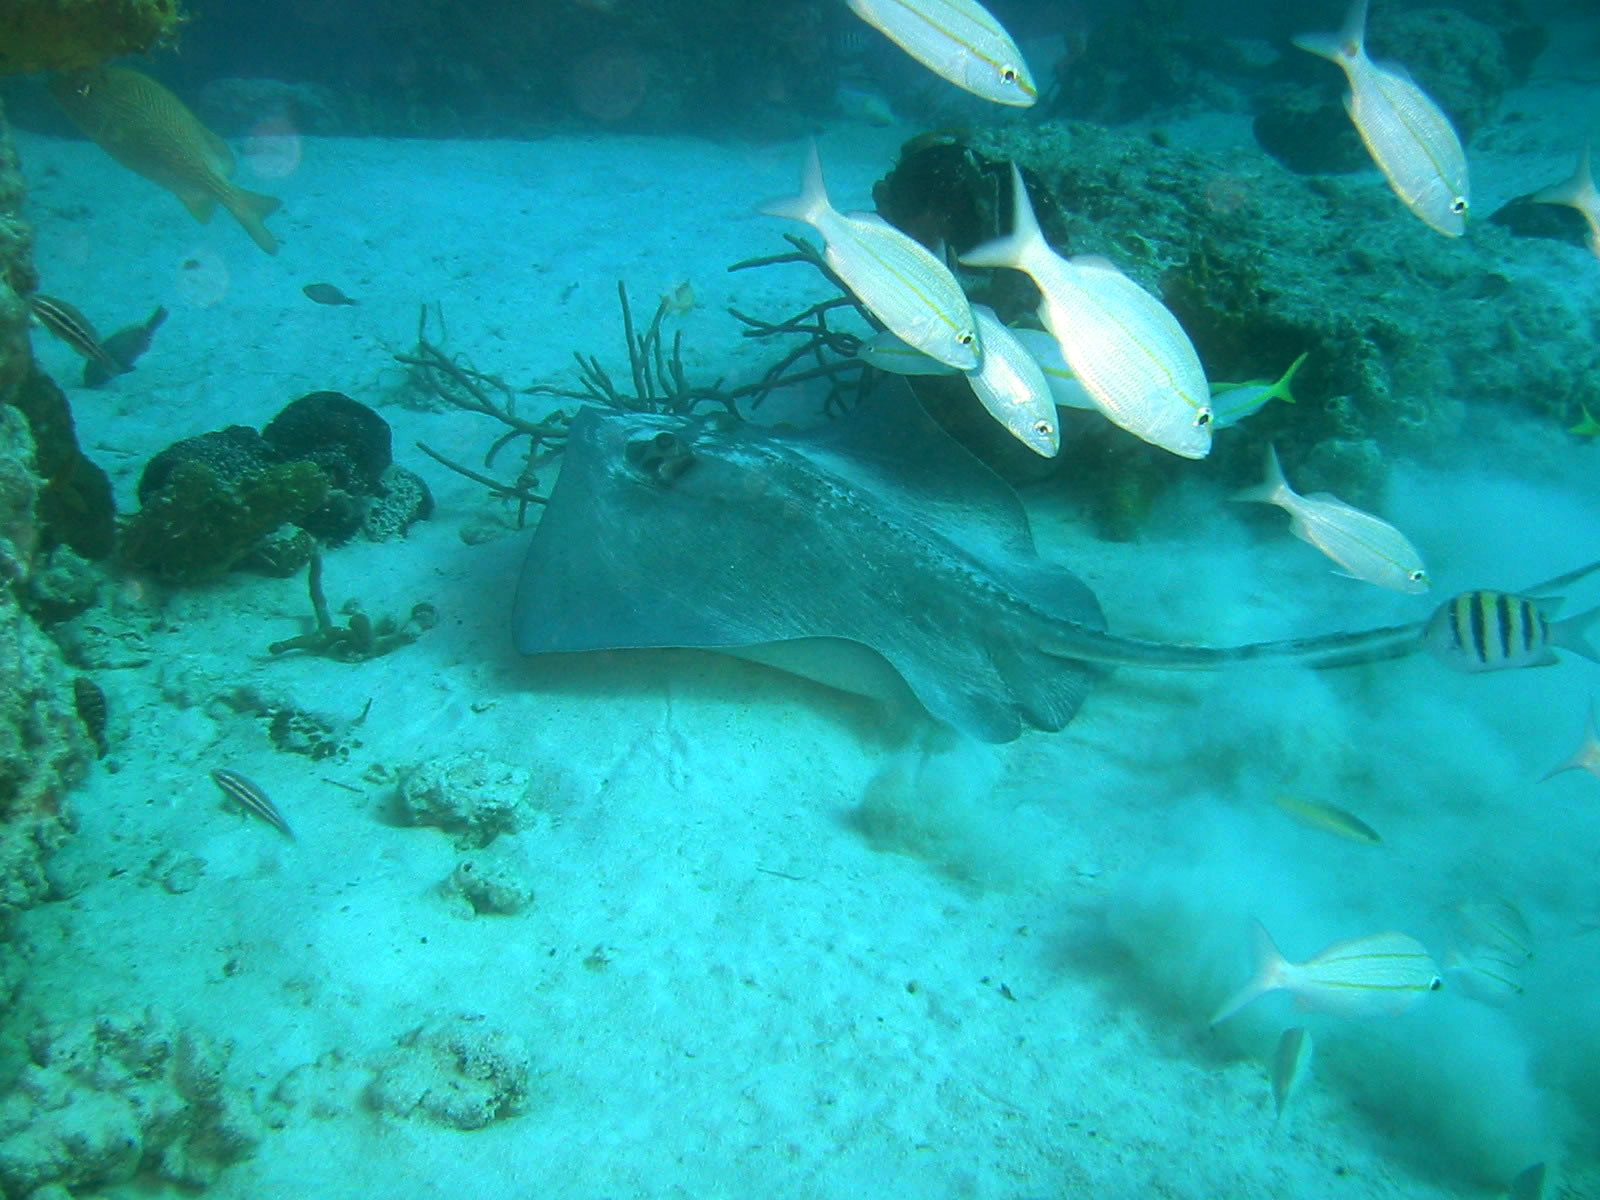 Southern Ray with Fish